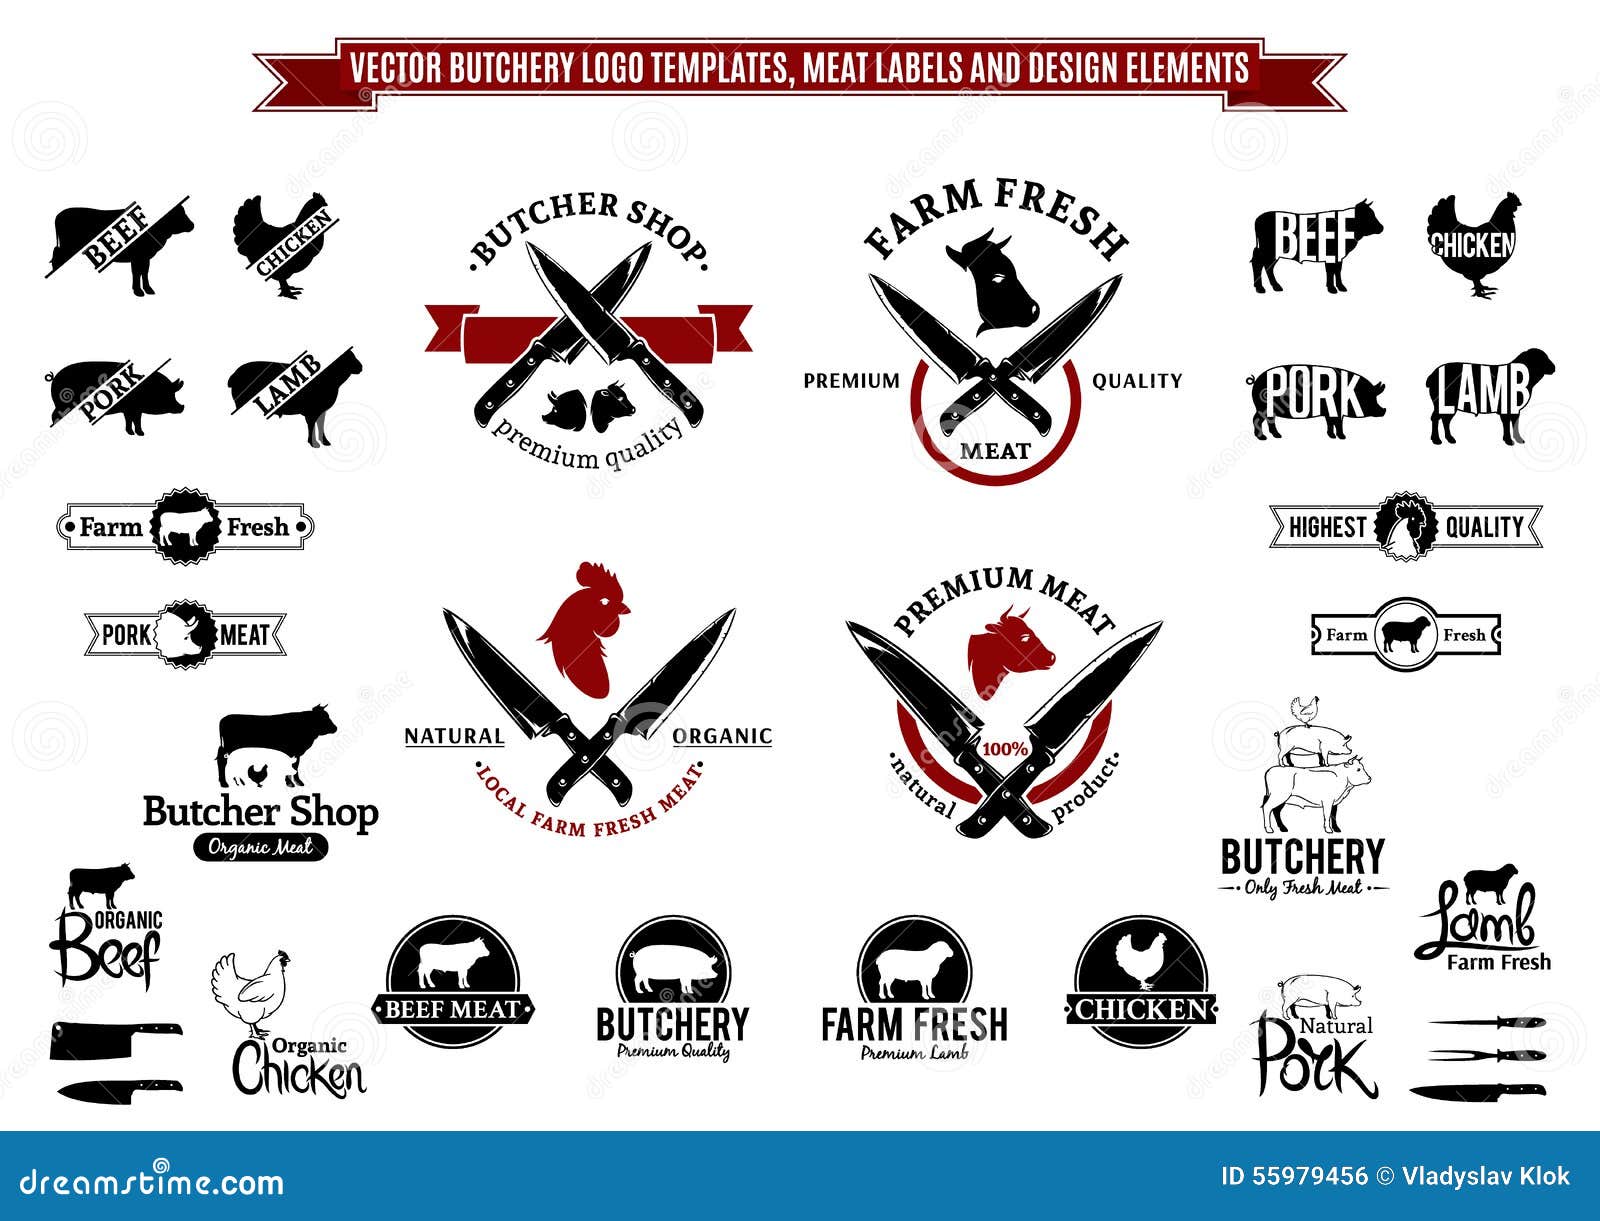  butchery logo templates, labels, icons and  s